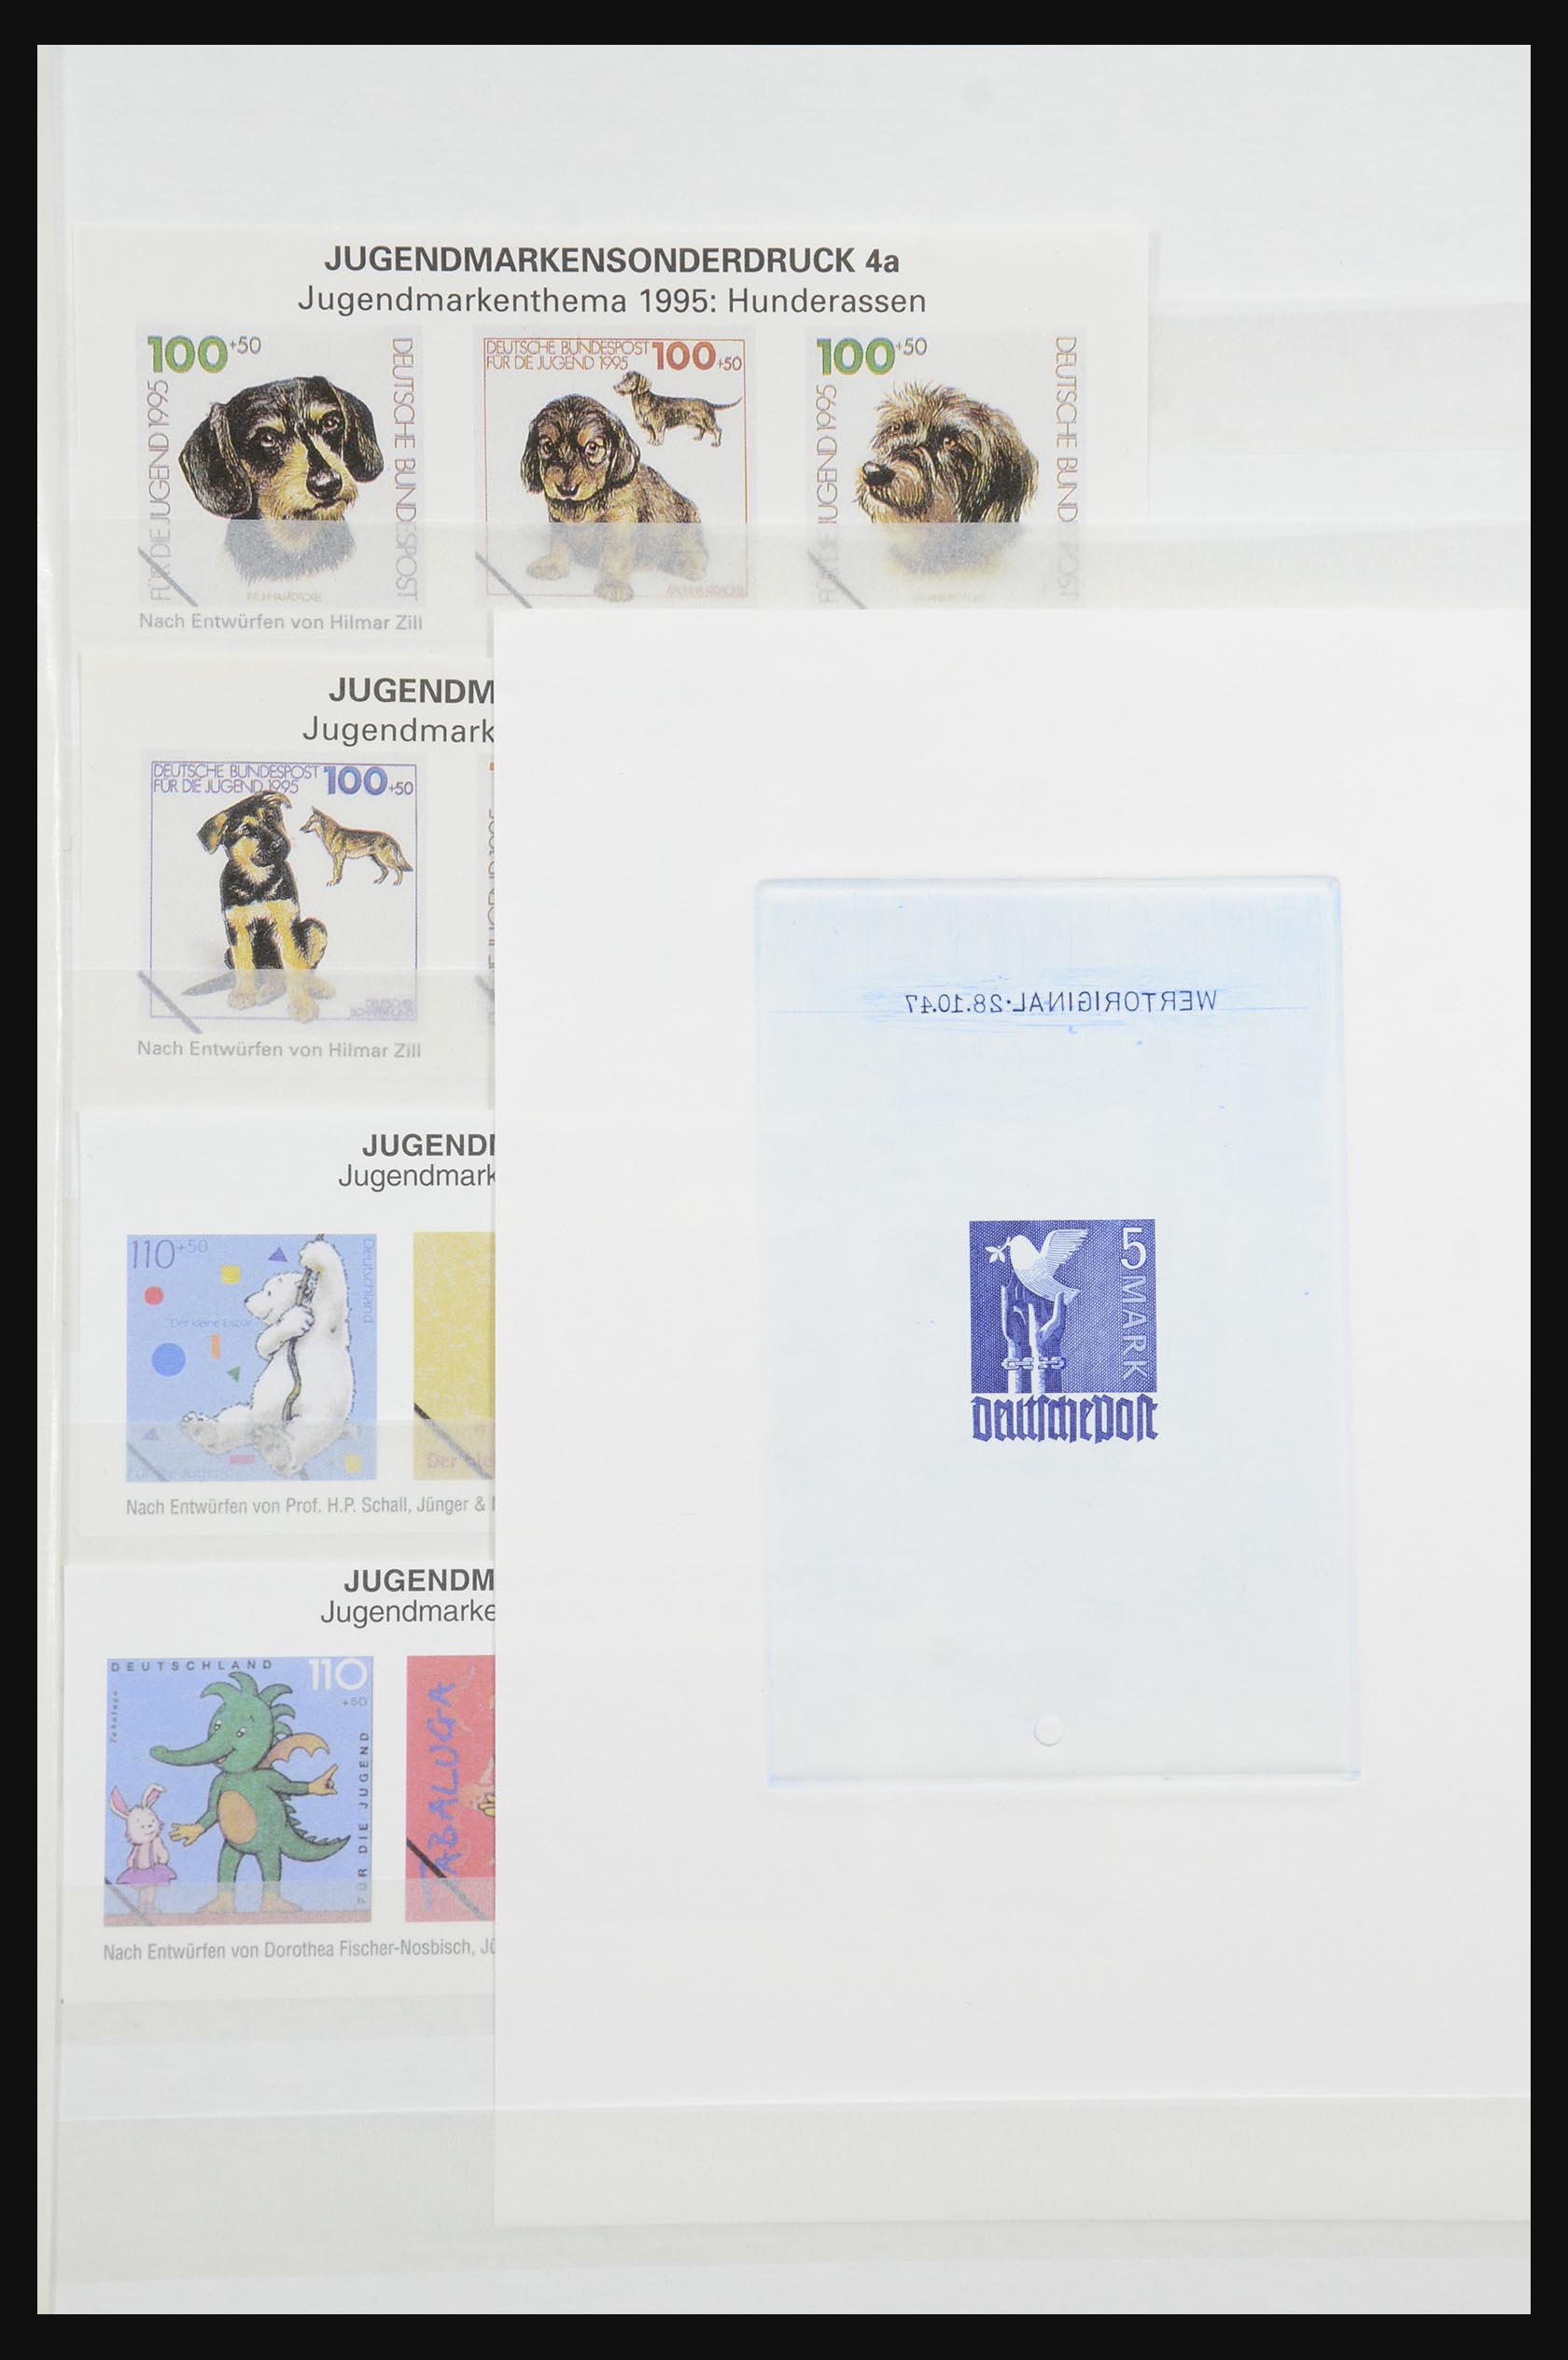 32050 021 - 32050 Bundespost special sheets 1980-2010.